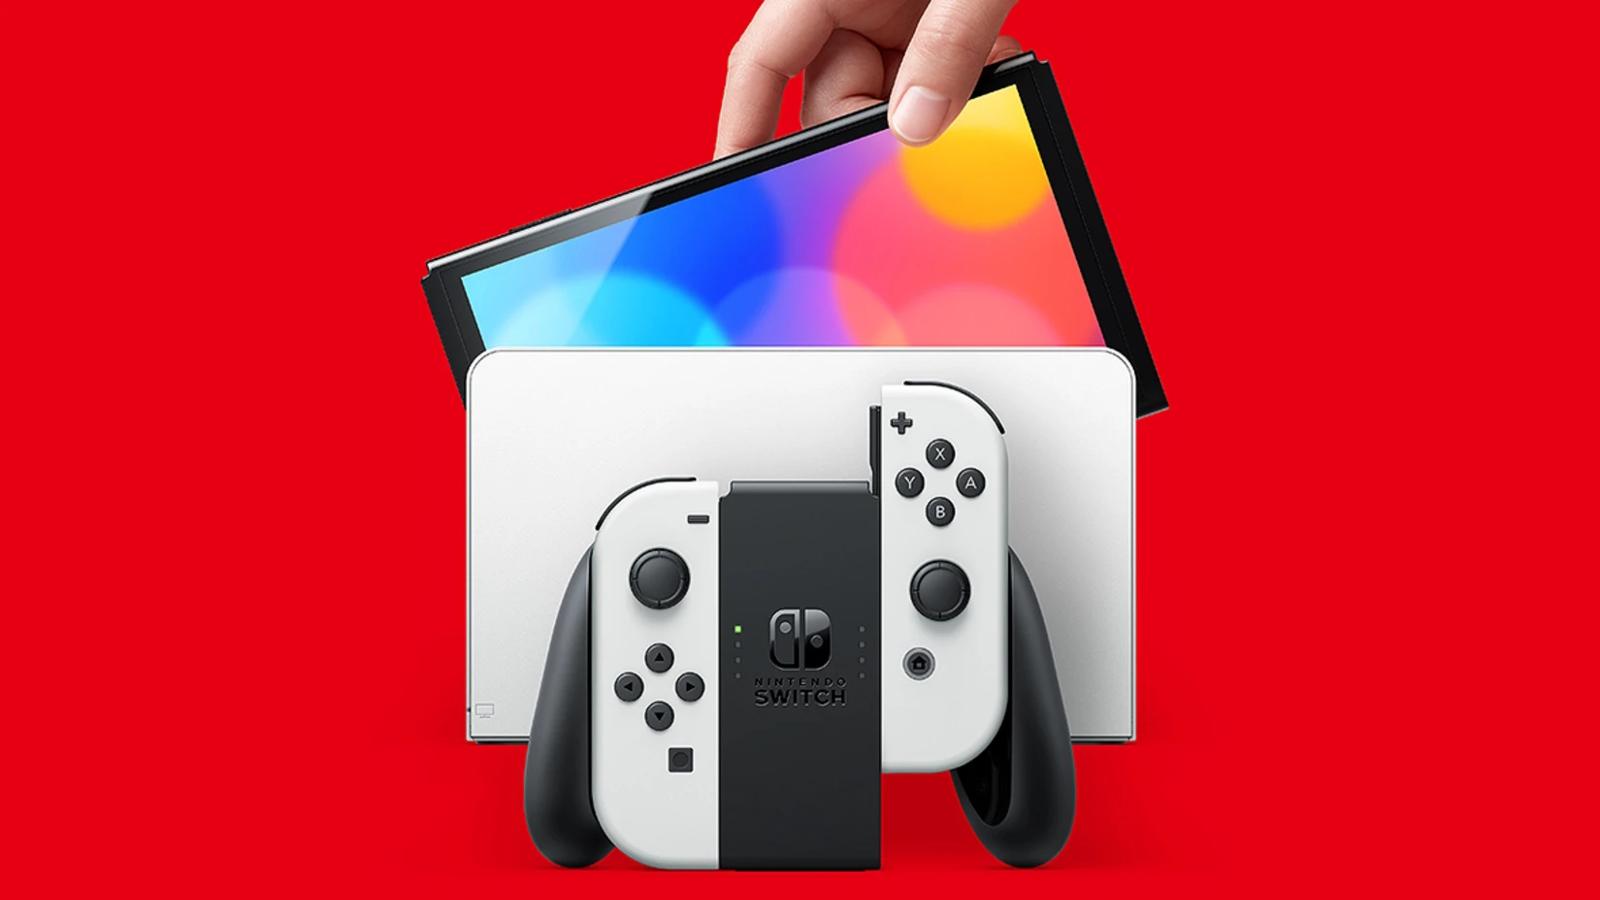 nintendo switch oled model being placed in dock with joycon controller in front.